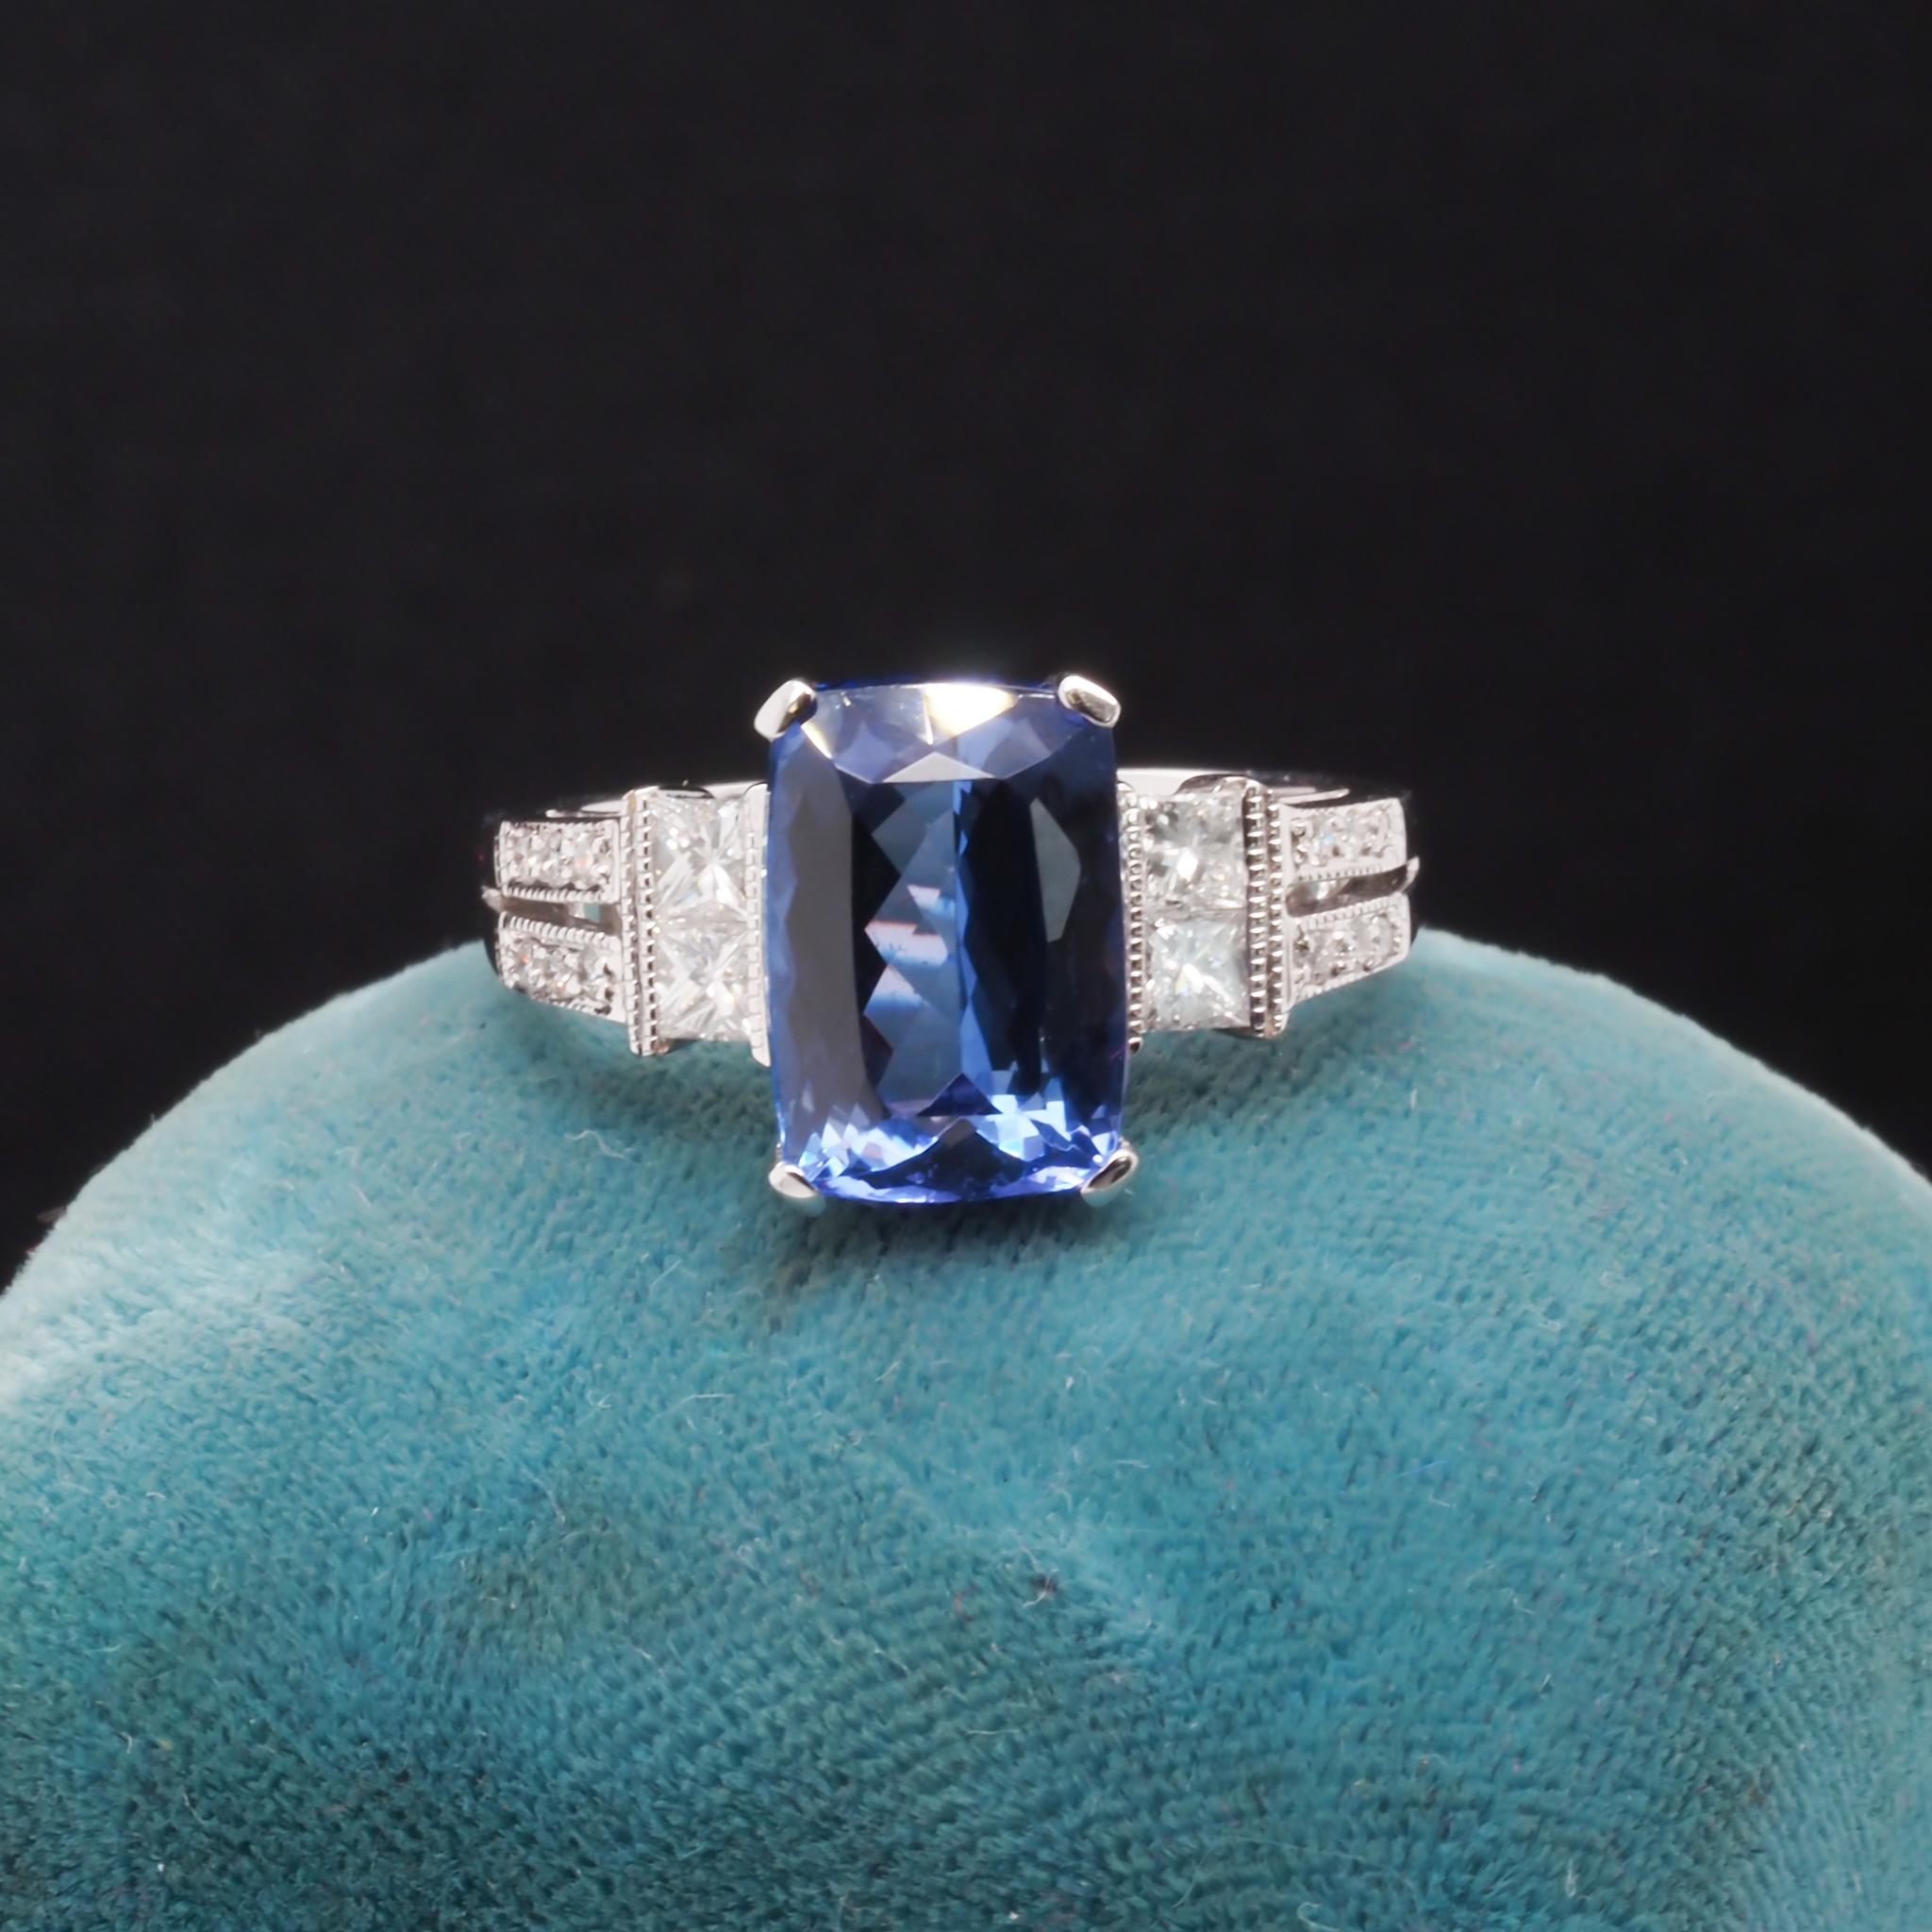 Year: 2000s
Item Details:
Ring Size: 7.25
Metal Type: 18K White Gold [Hallmarked, and Tested]
Weight: 6.2 grams
Tanzanite Details:
GIA Report #: 2225950711
Stone Weight: 4.37ct
Details: Cushion Shape, Violet-Blue, Natural Tanzanite
Diamond Details: